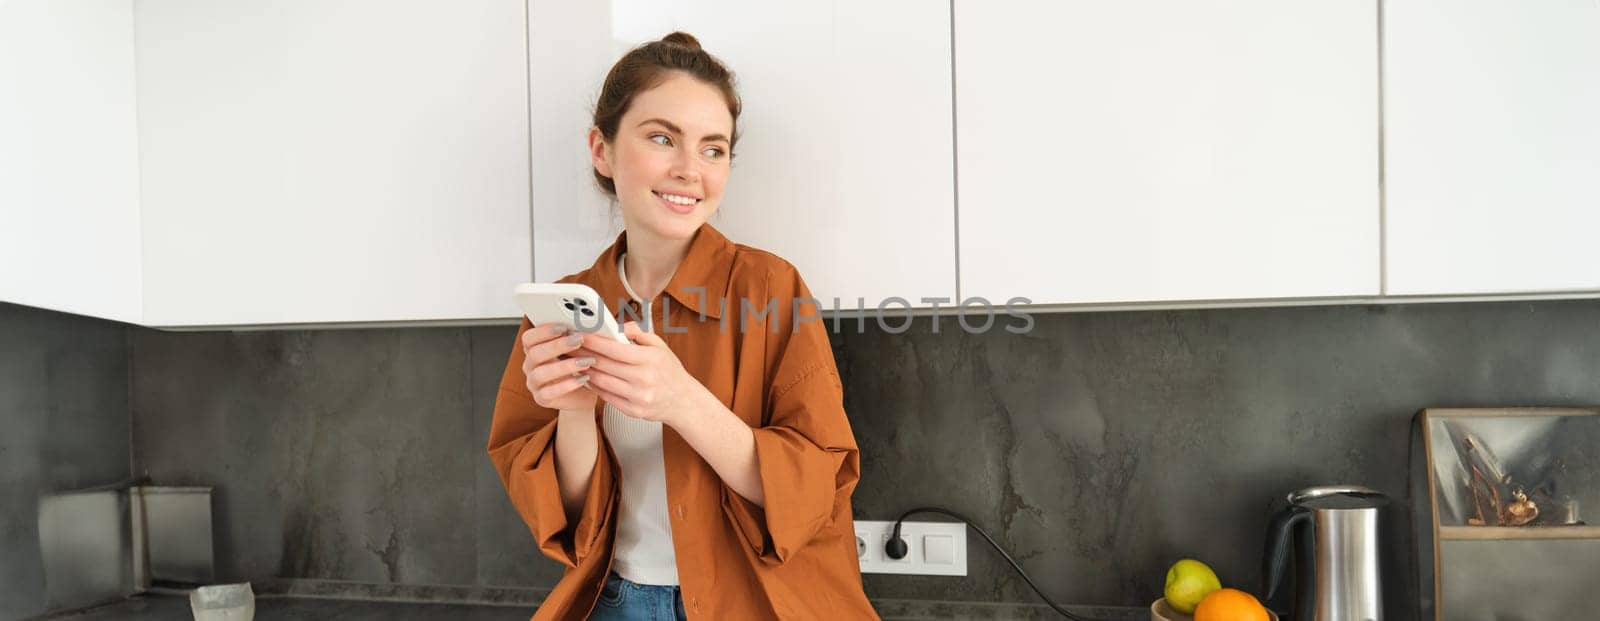 Modern girl at home, sits on kitchen counter with smartphone and smiling, using mobile phone.